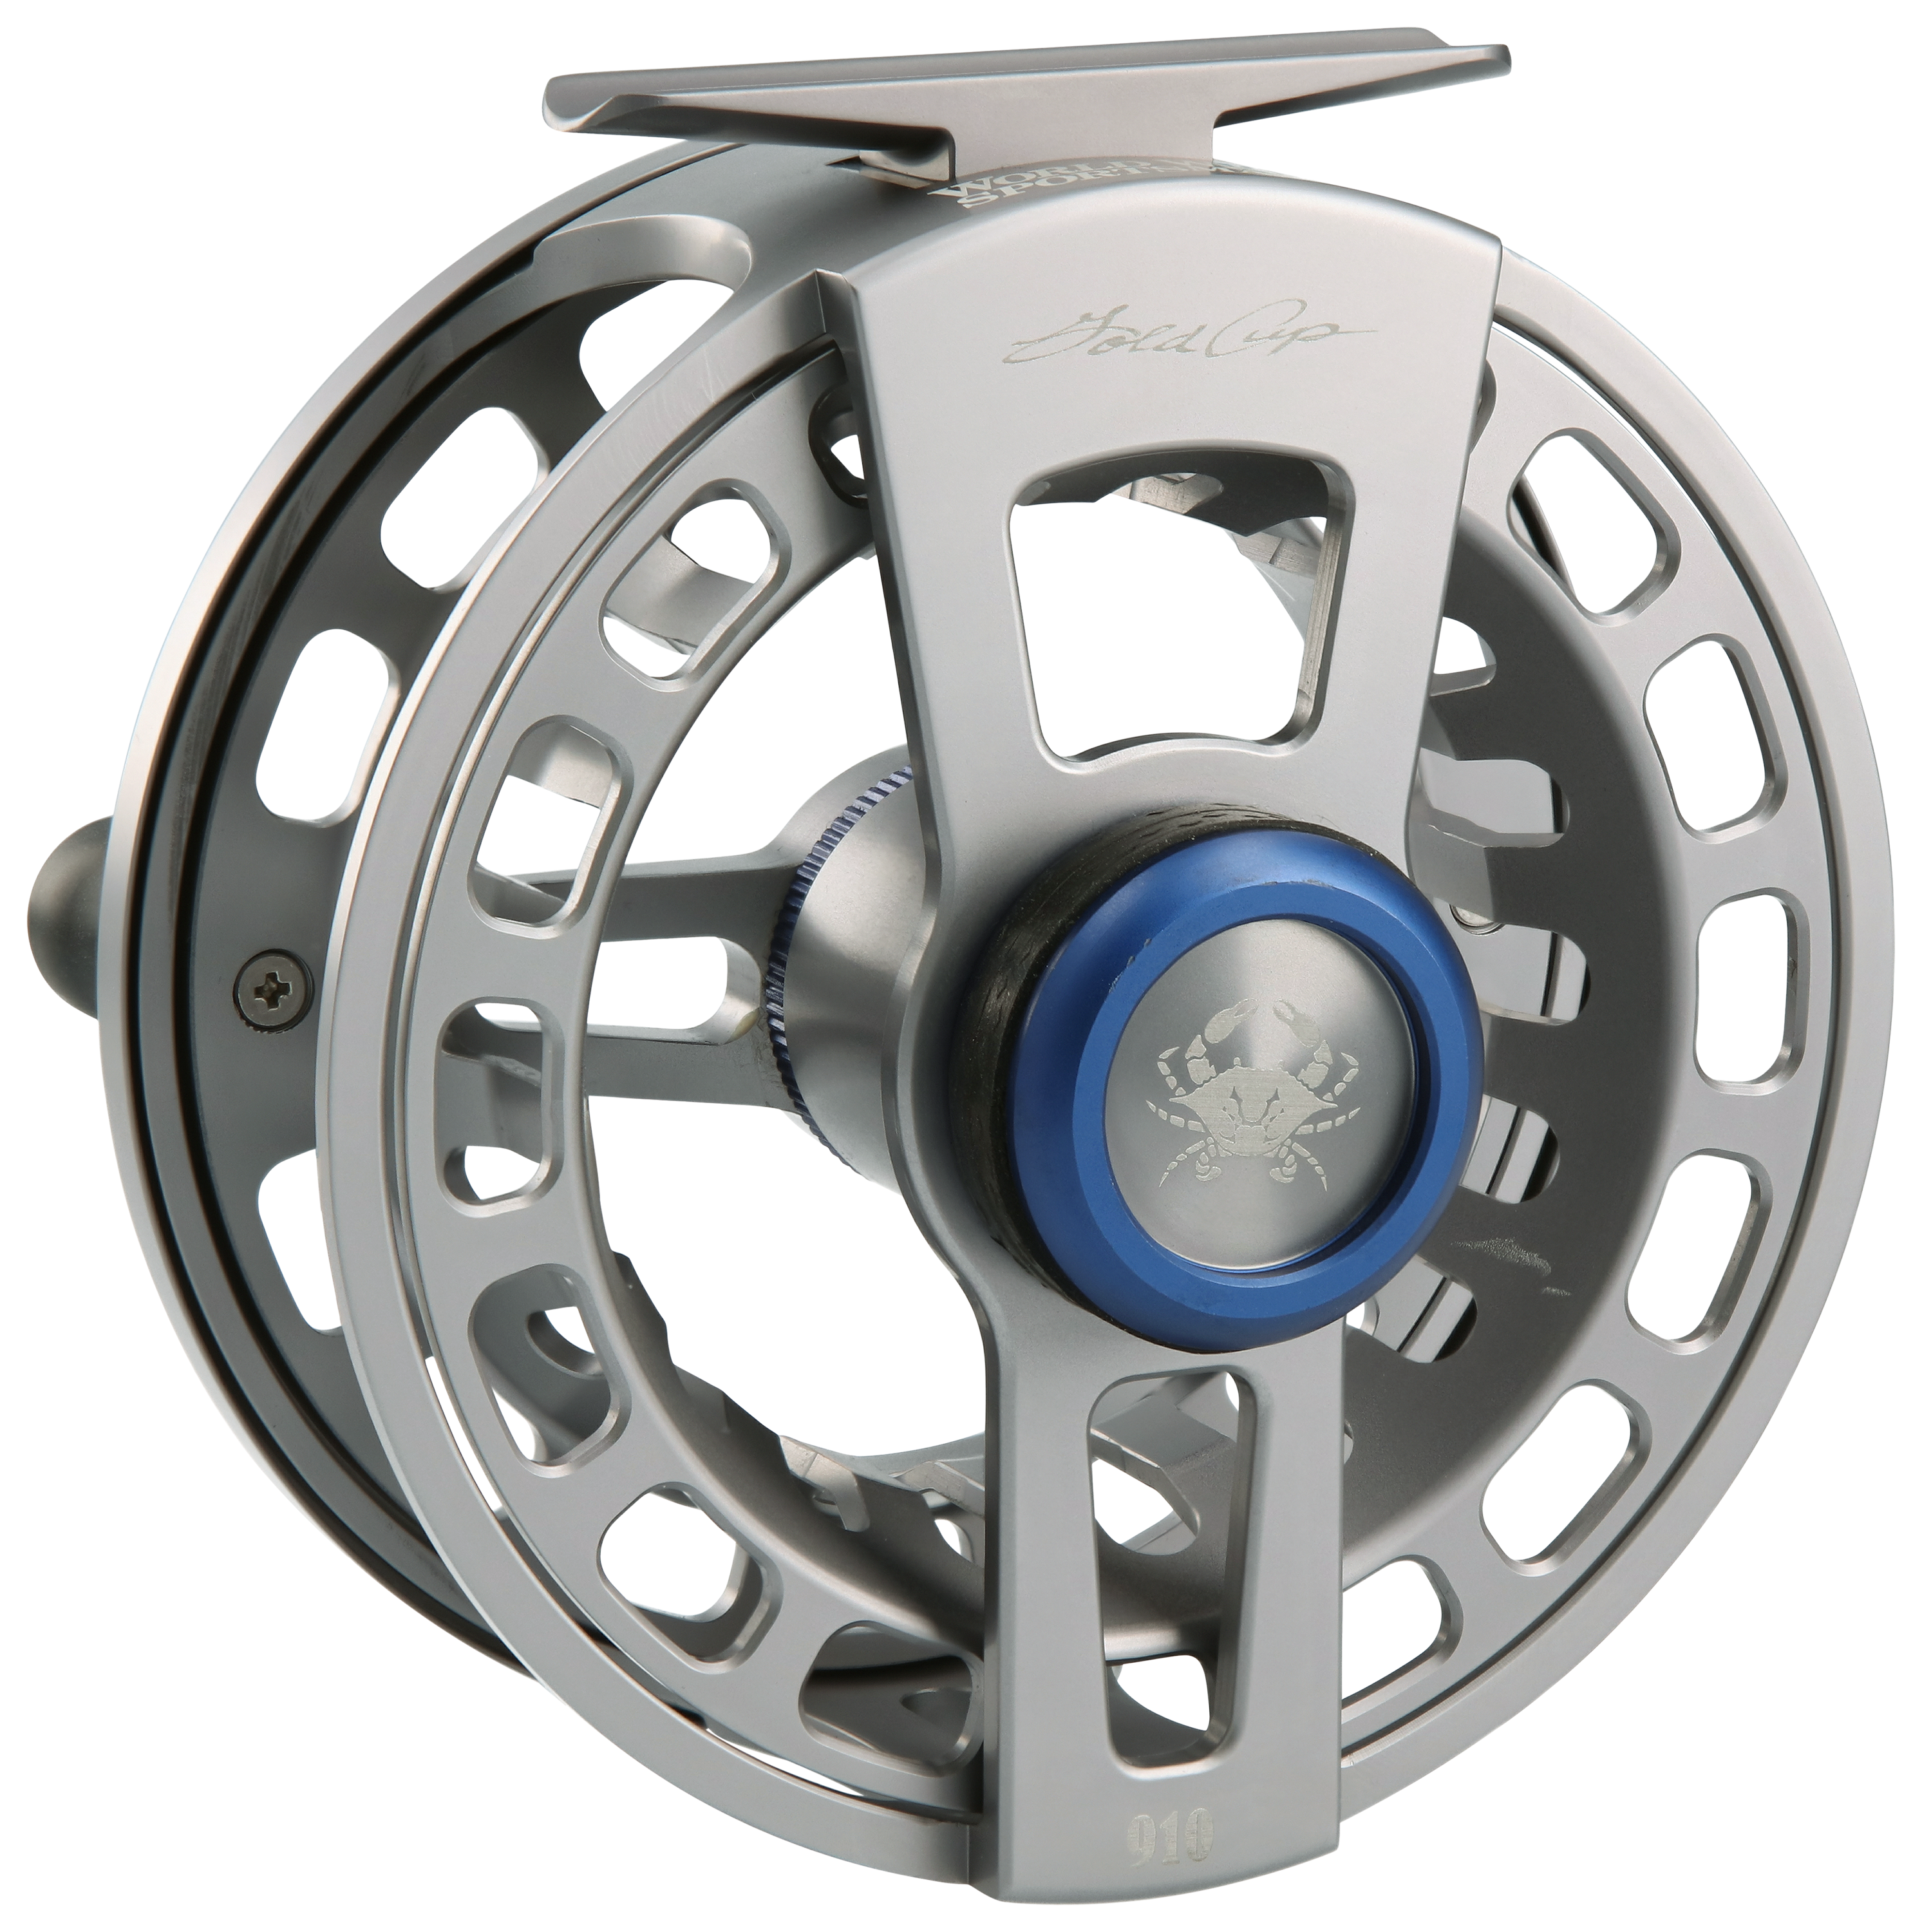 World Wide Sportsman Gold Cup Fly Reel - GC78